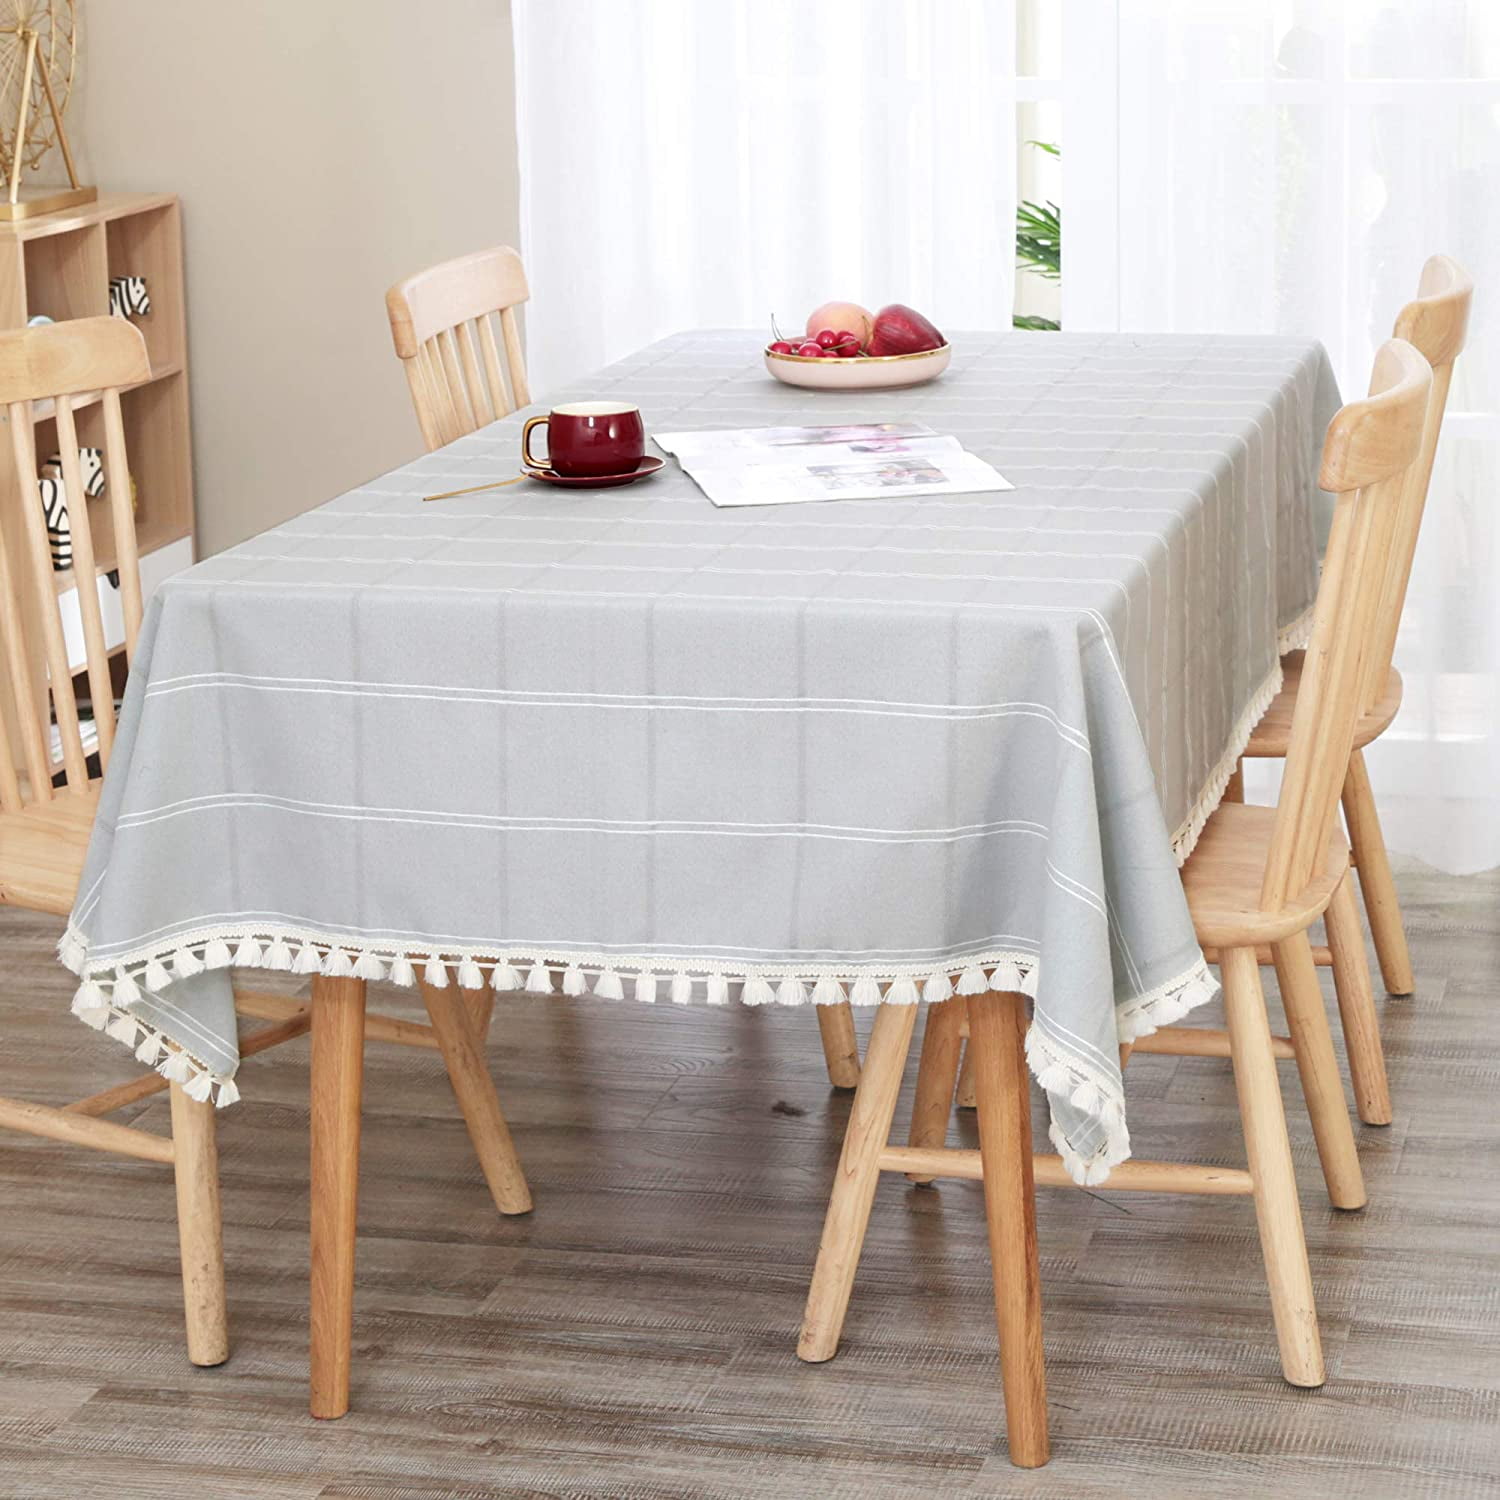 Work Trucks Tablecloth Table Cloth for Rectangle Tables Waterproof Durable Flower Table Cover for Kitchen Dining Room 54 X 72 Inch